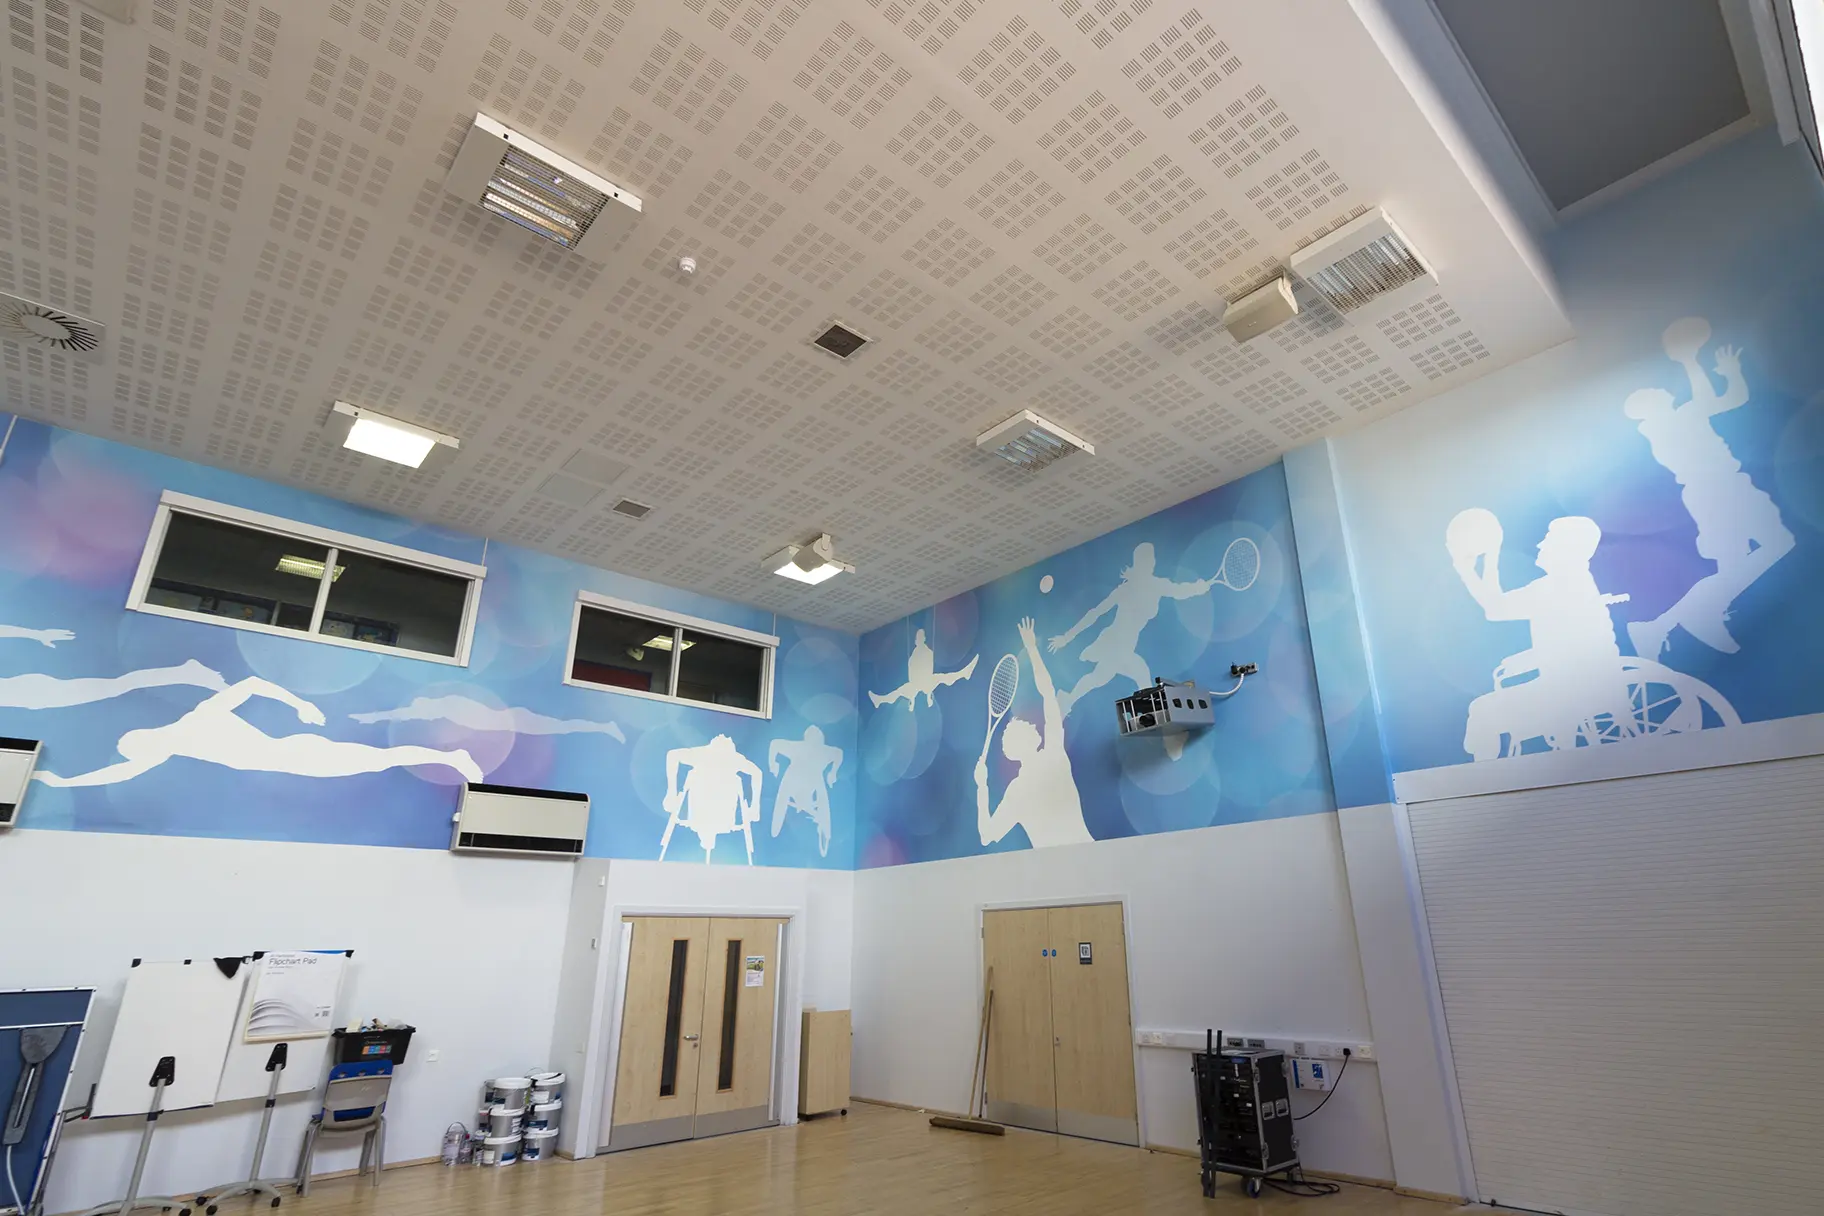 College Park School, sports hall large format wall graphics